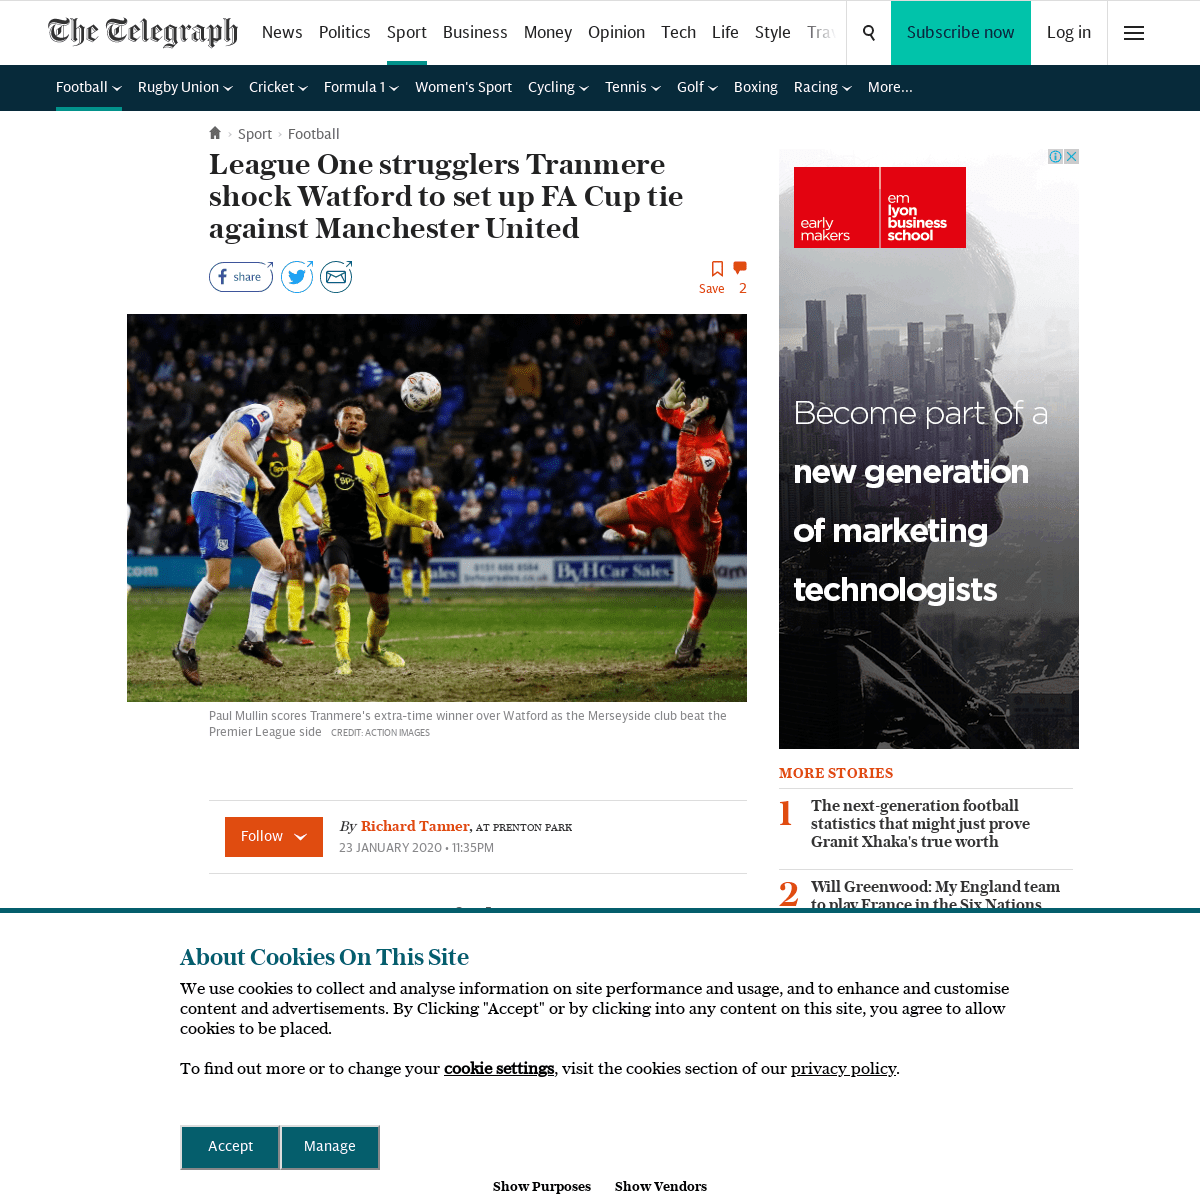 A complete backup of www.telegraph.co.uk/football/2020/01/23/league-one-strugglers-tranmere-shock-watford-set-fa-cup-tie/